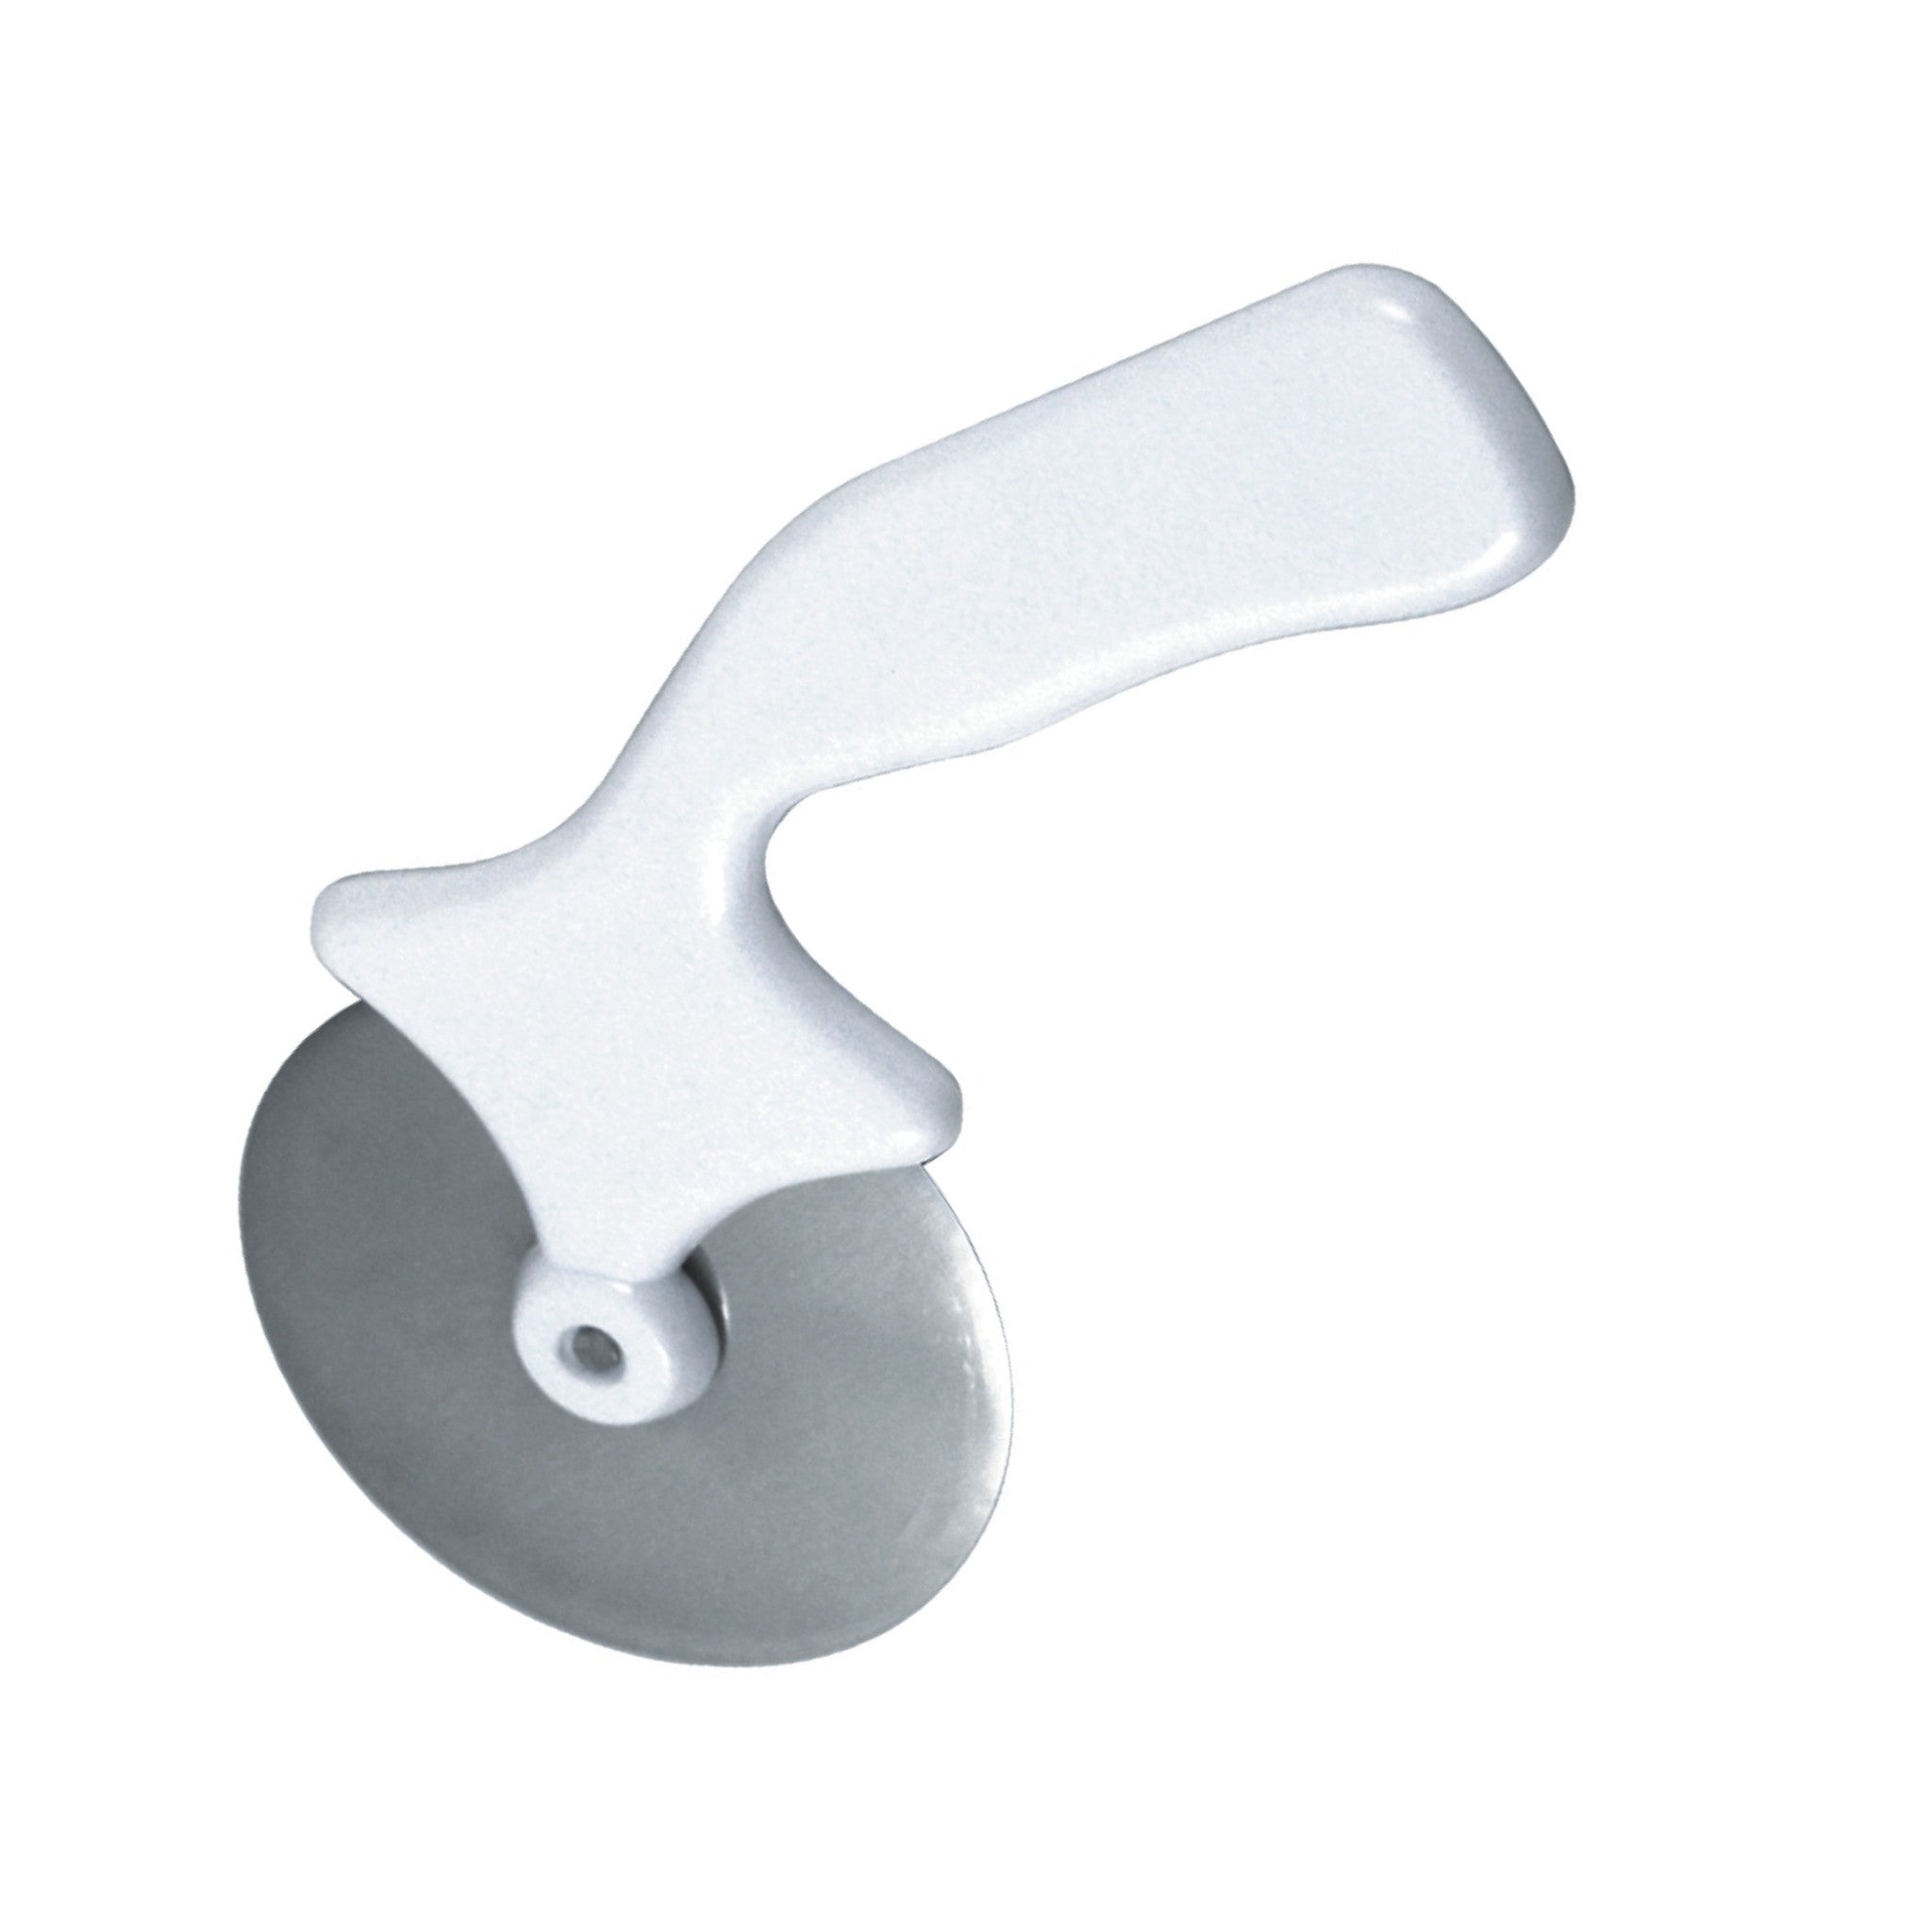 White and stainless steel pizza cutter